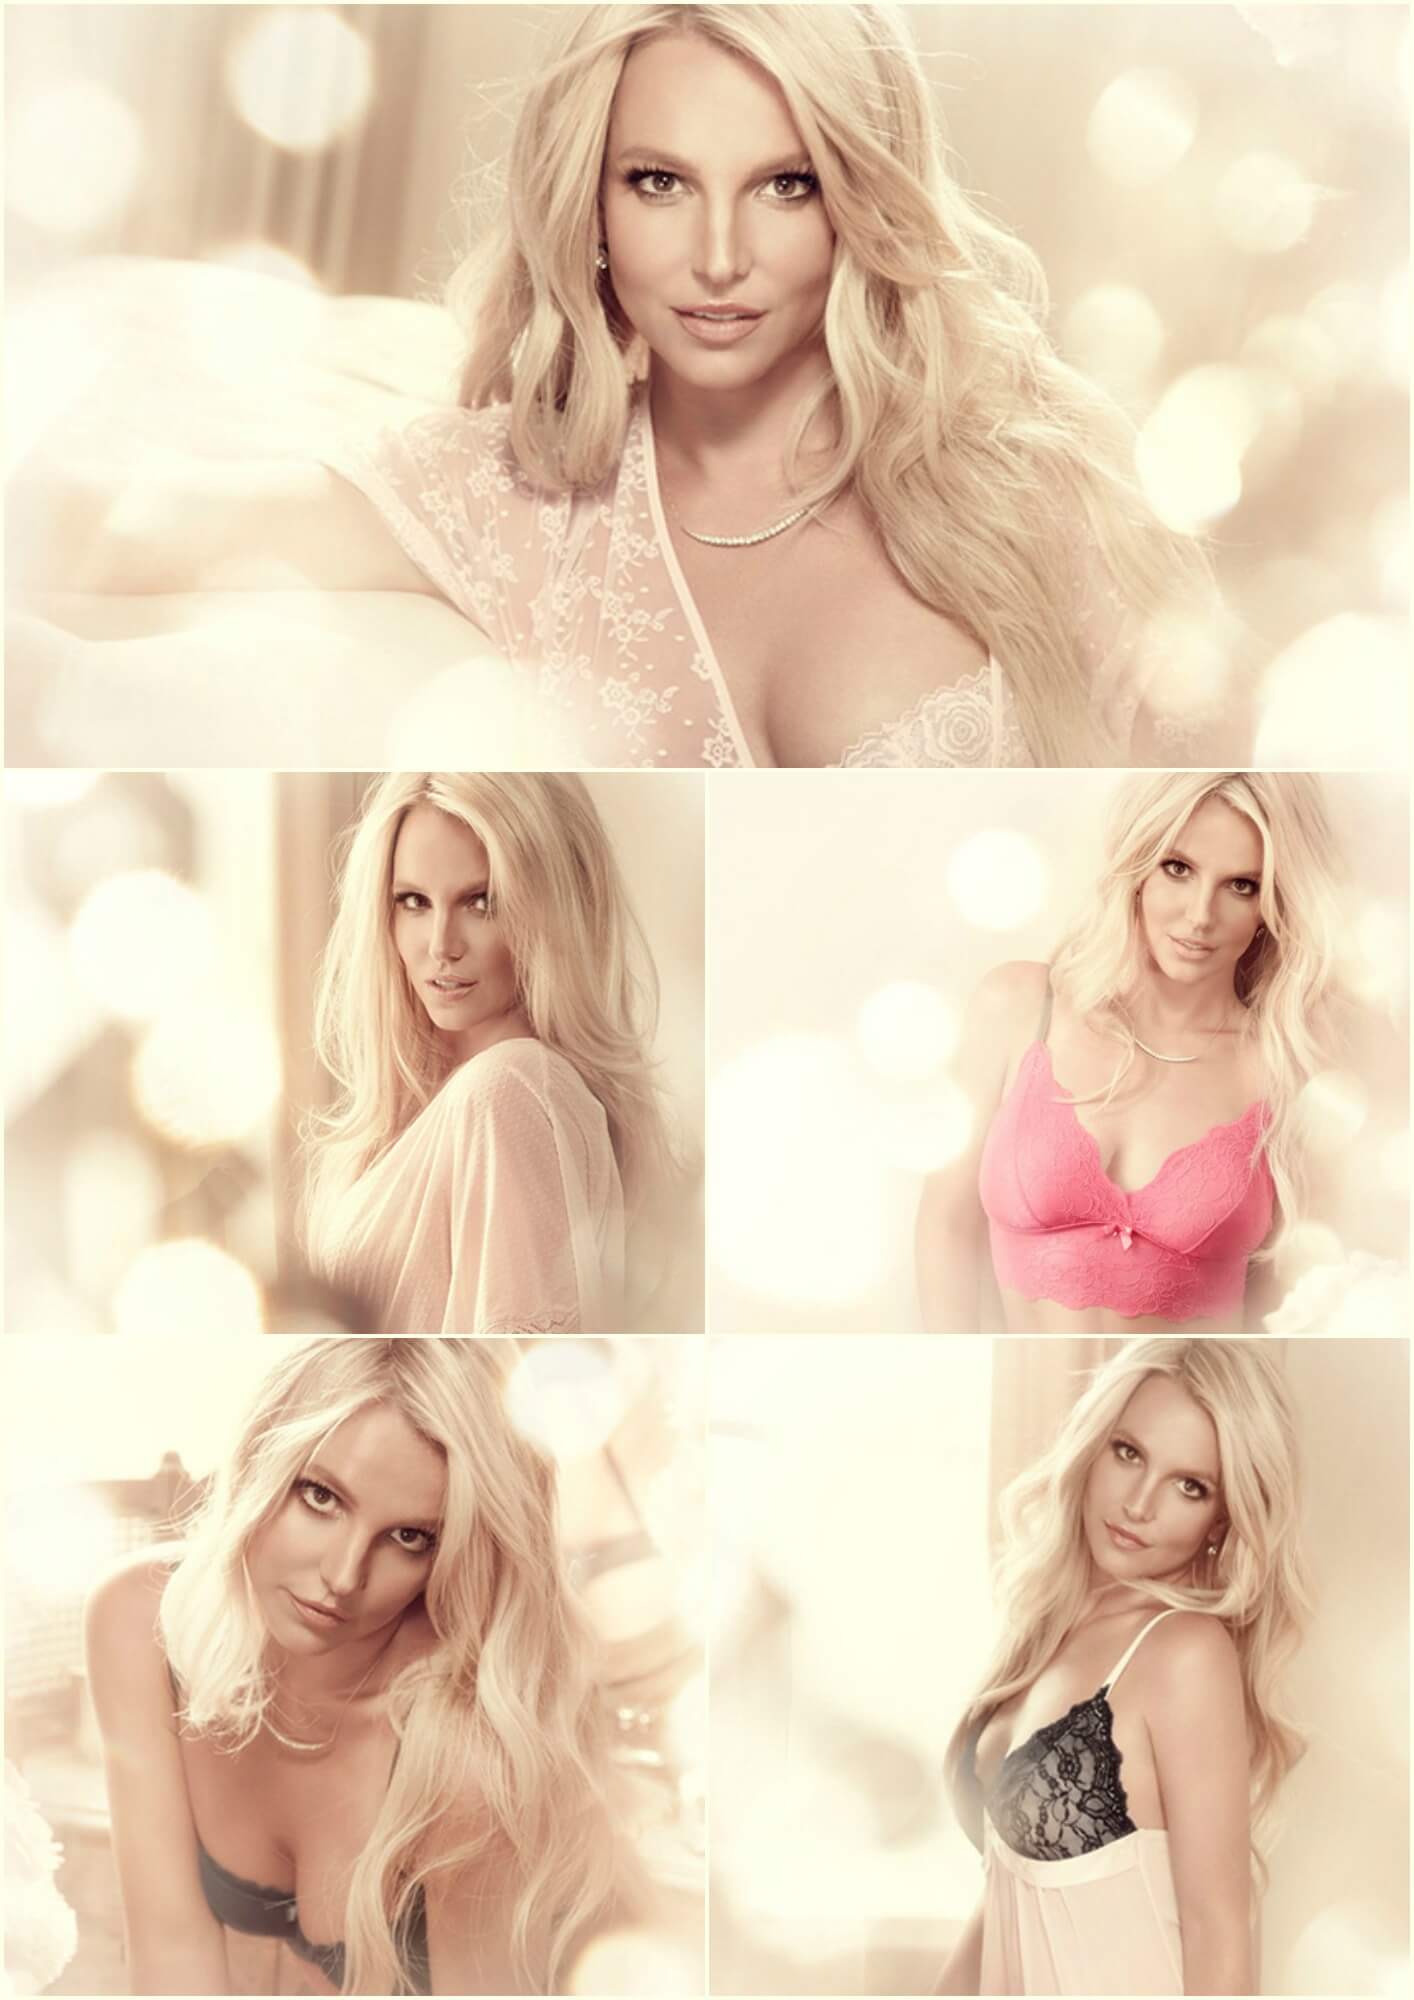 A Quick Look at the New Intimate Britney Spears Lingerie Collection